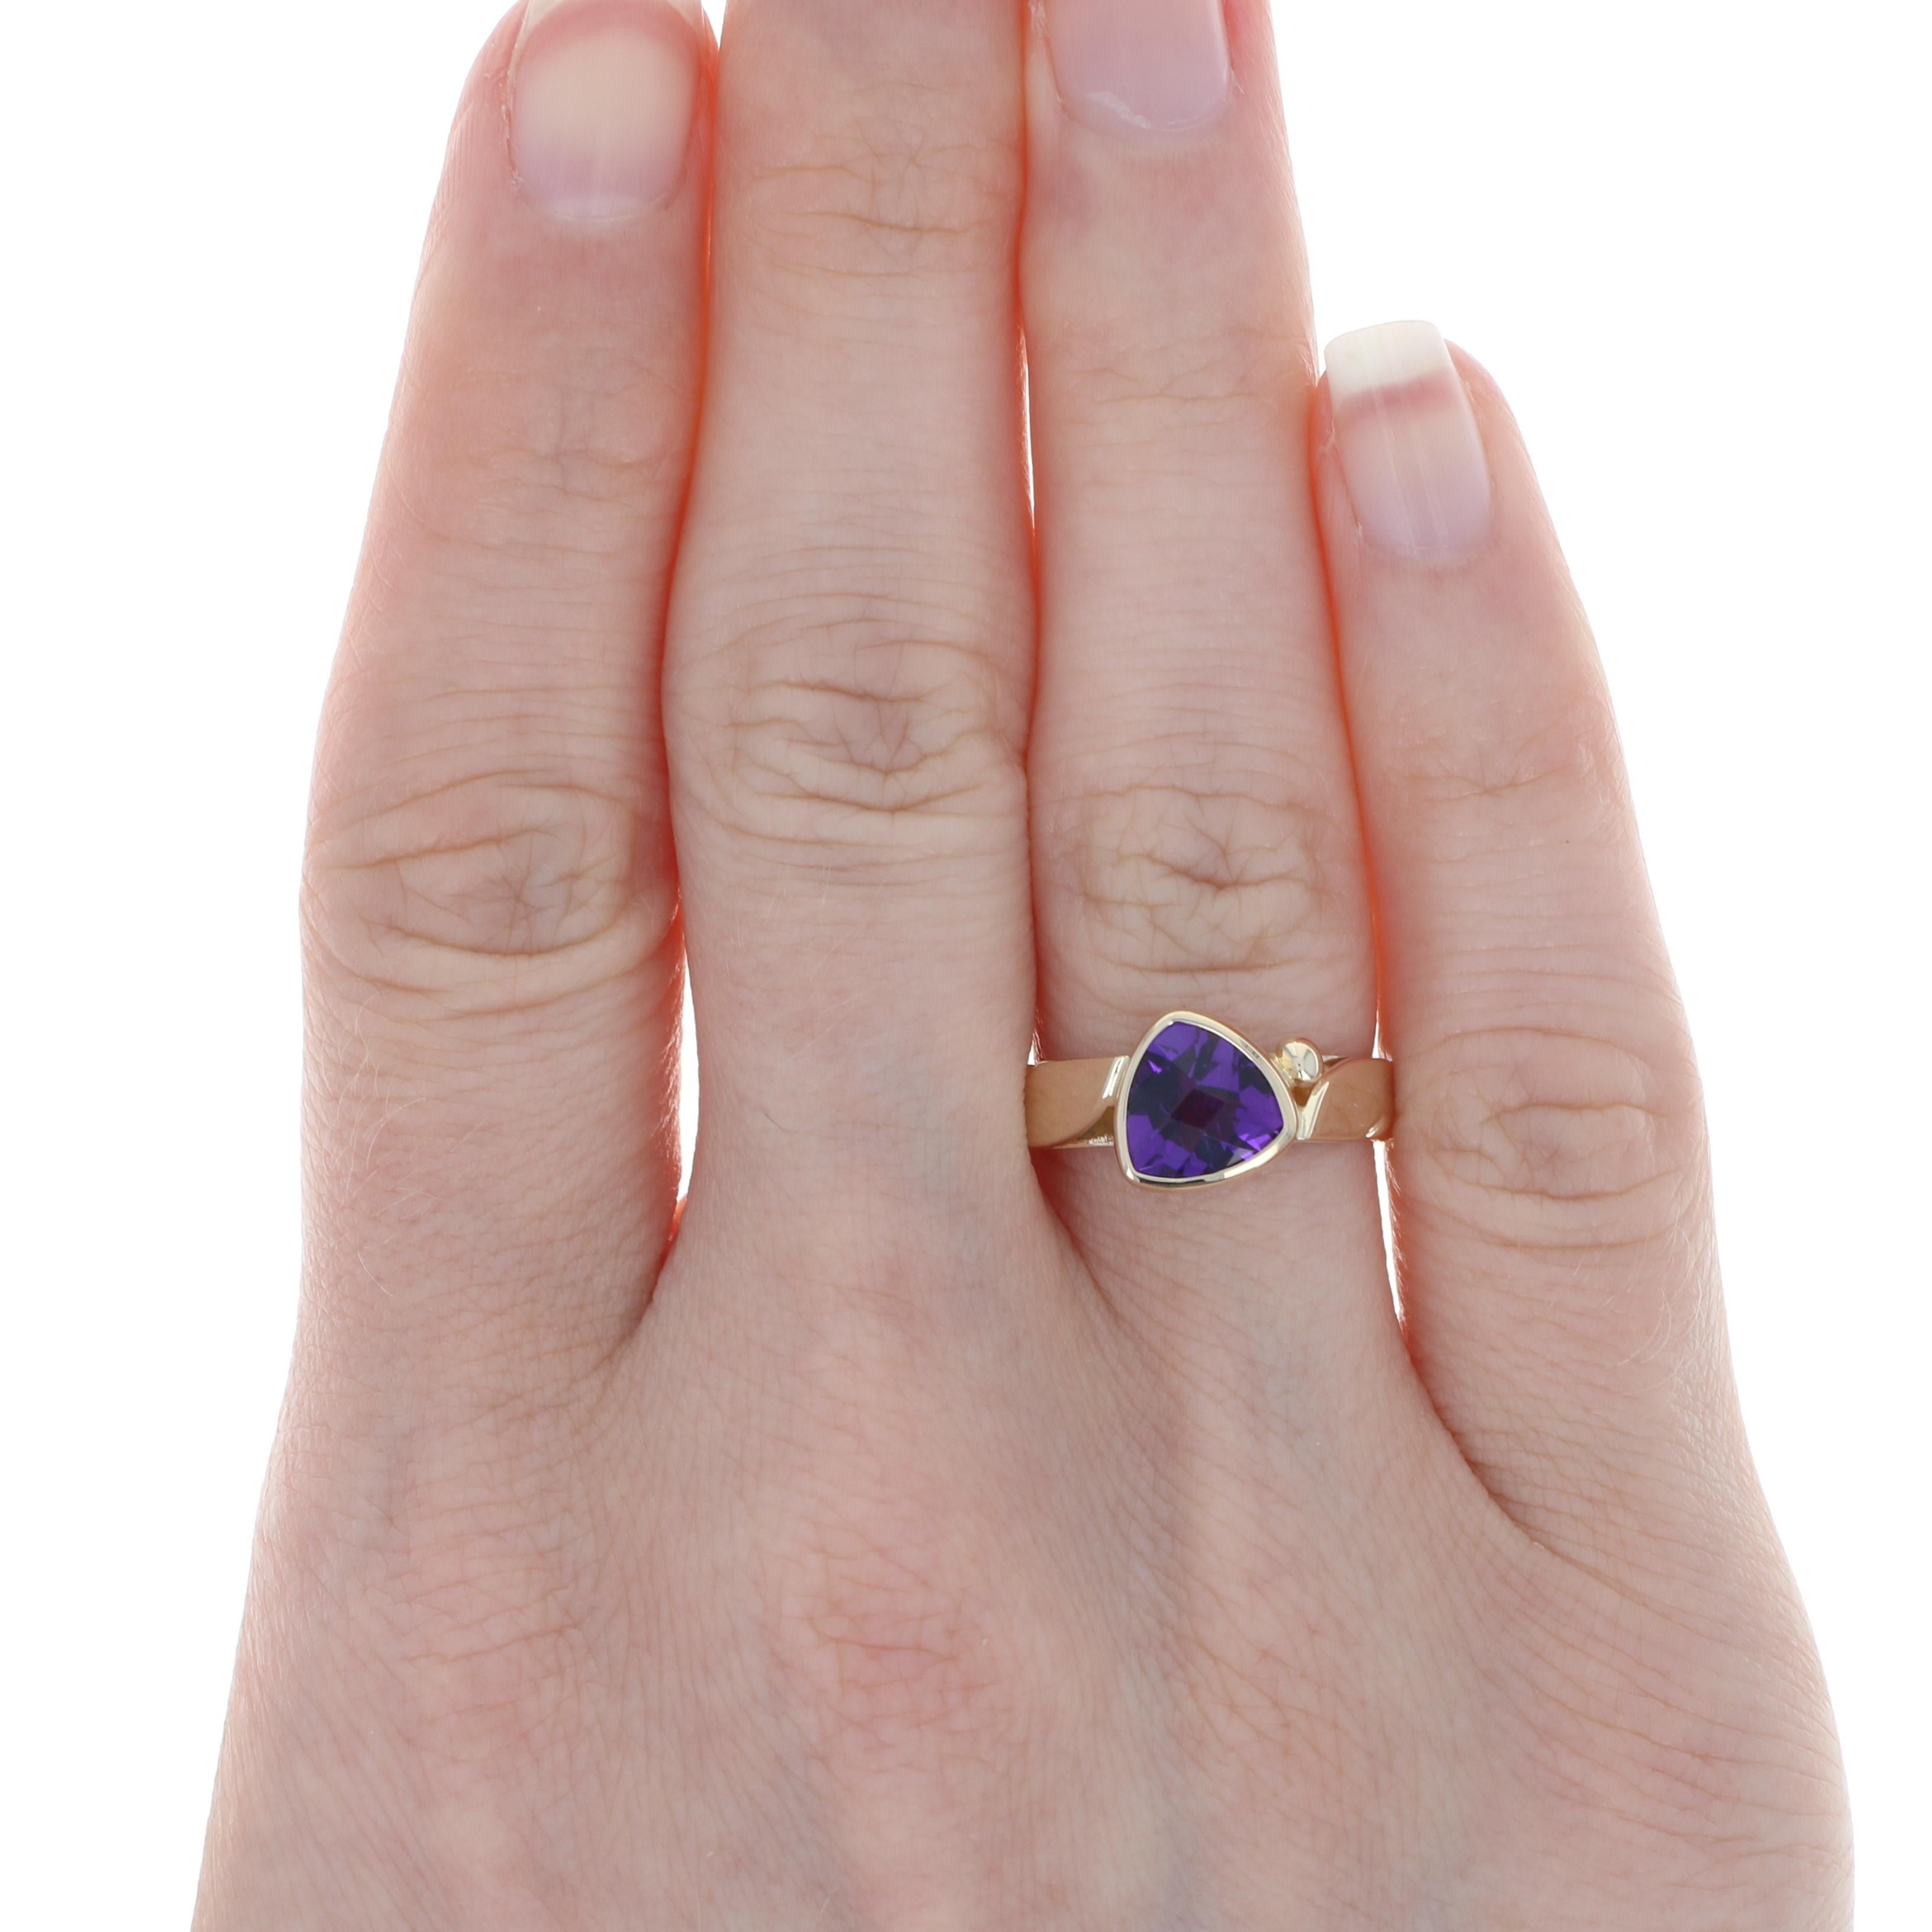 Trillion Cut Yellow Gold Amethyst Southwestern Solitaire Bypass Ring, 14k Trillion 1.50 Carat